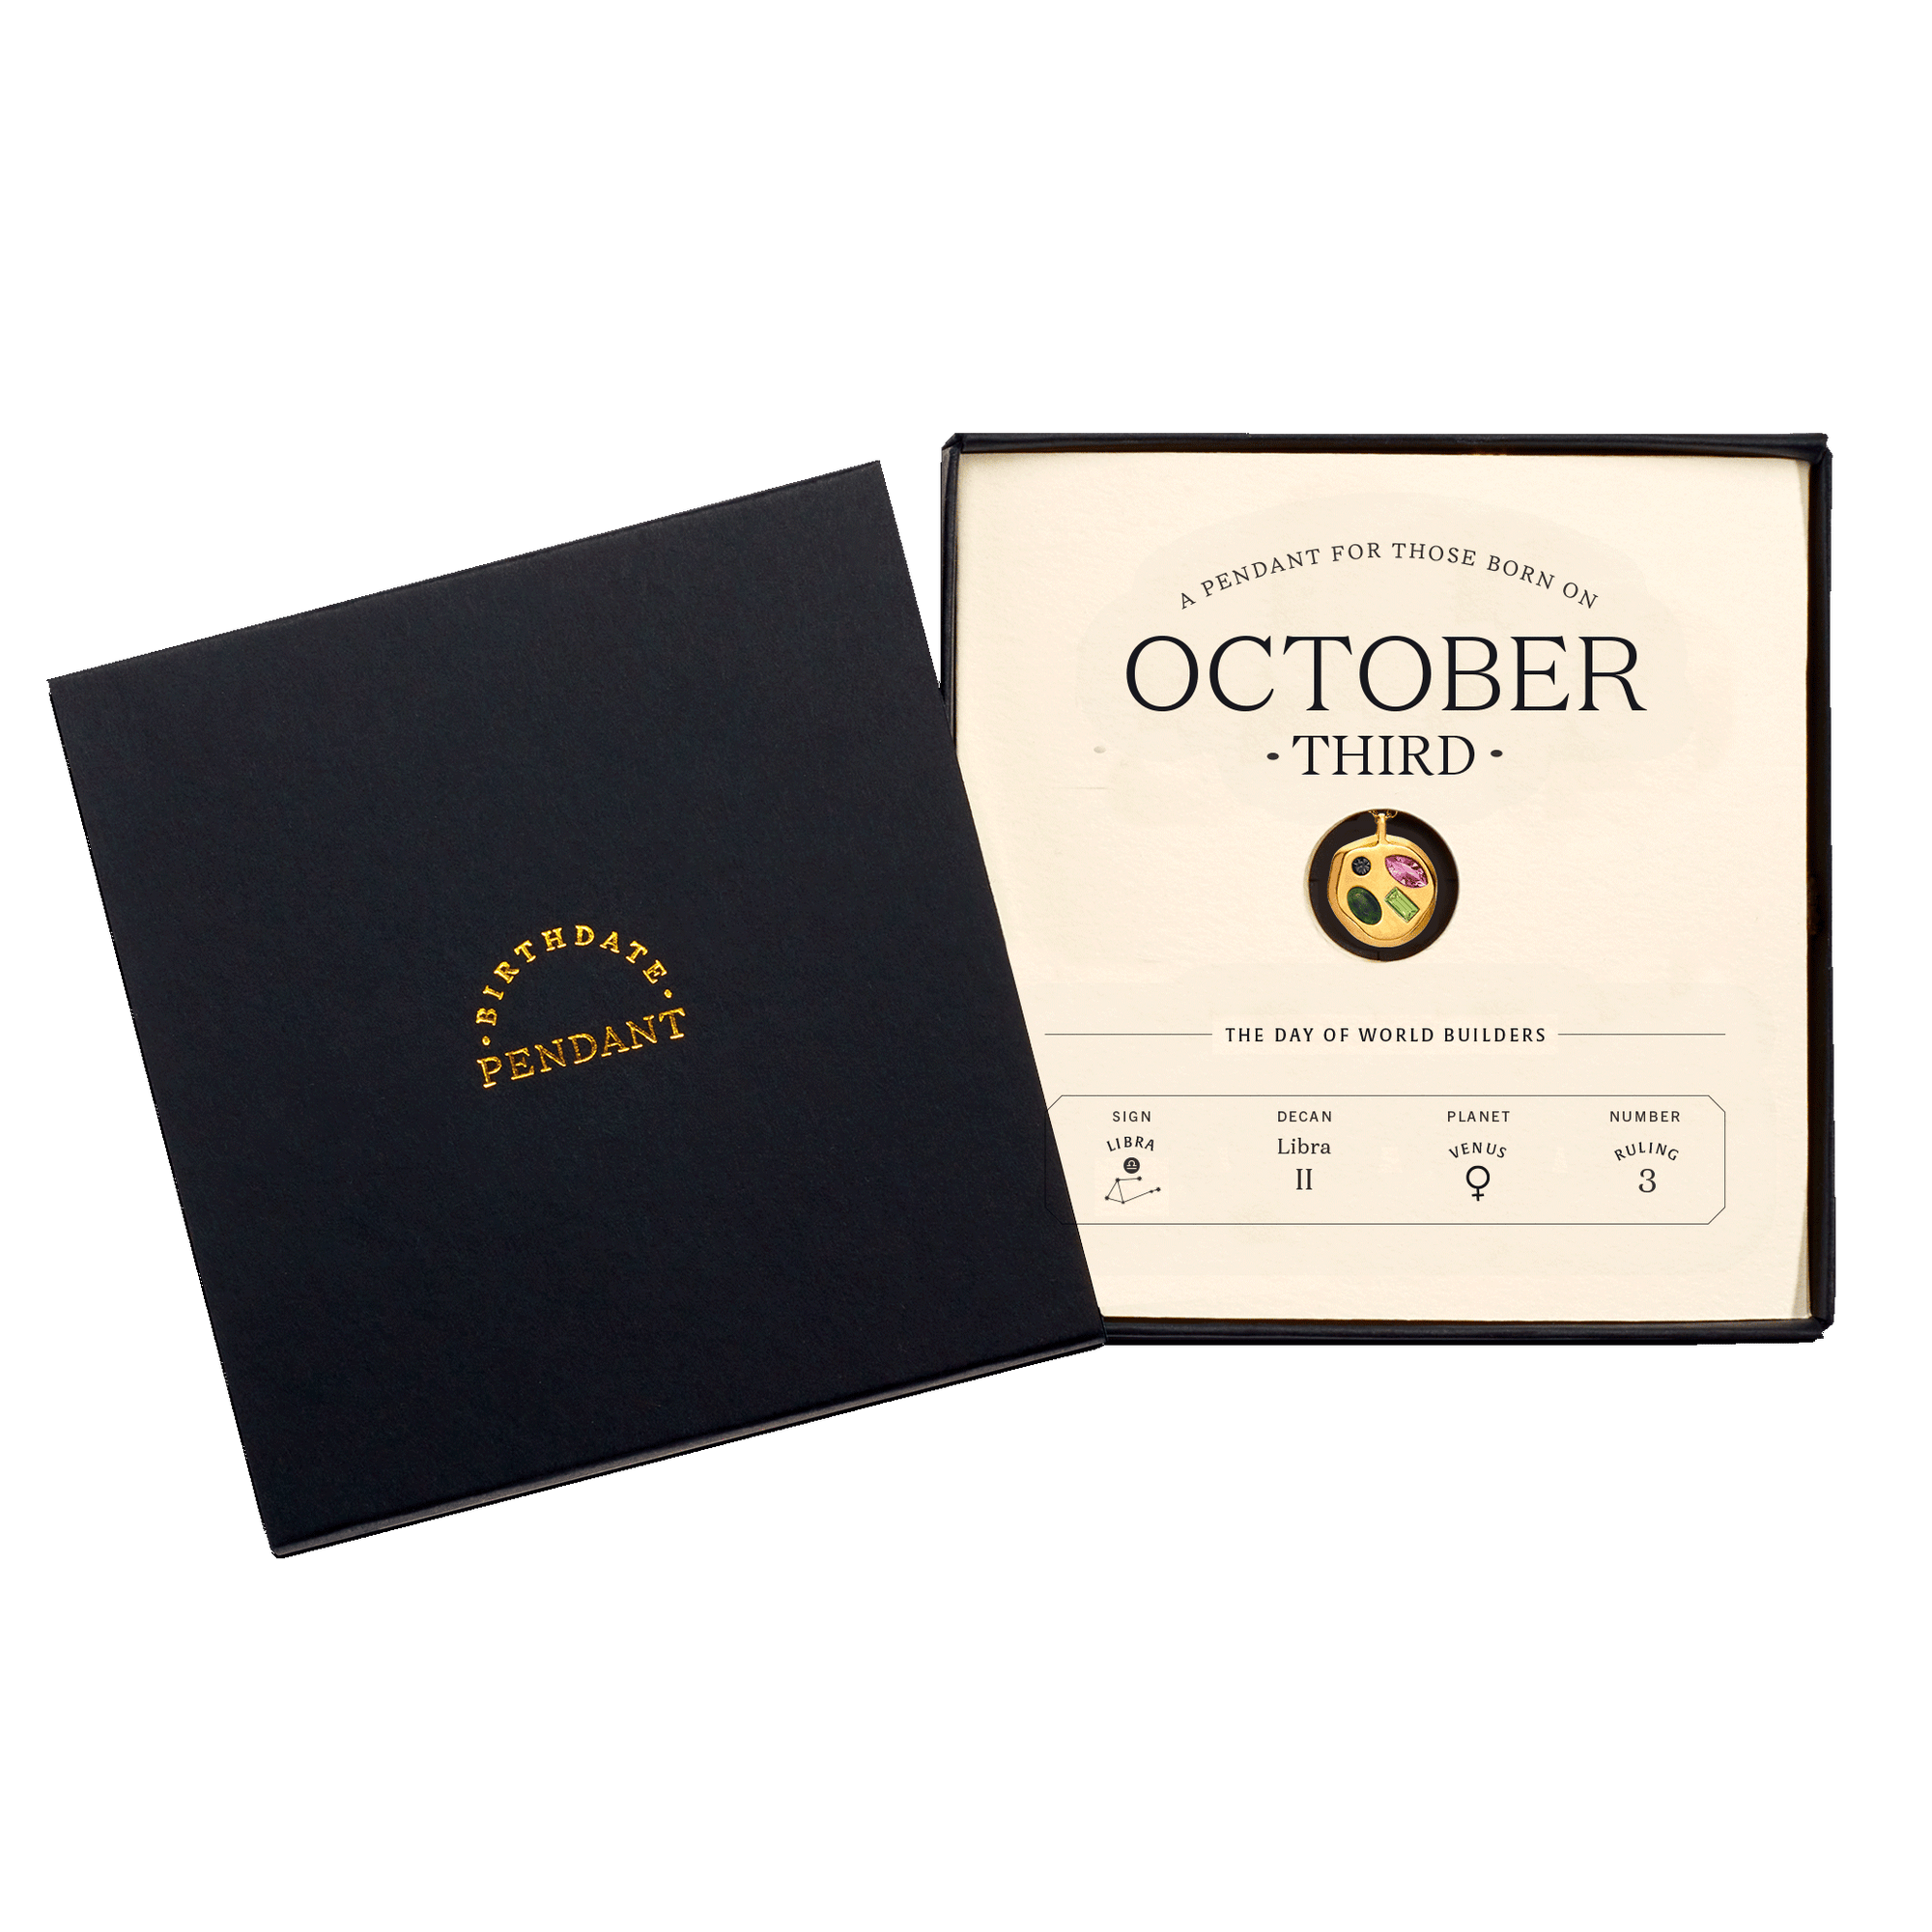 The October Third Pendant inside its box